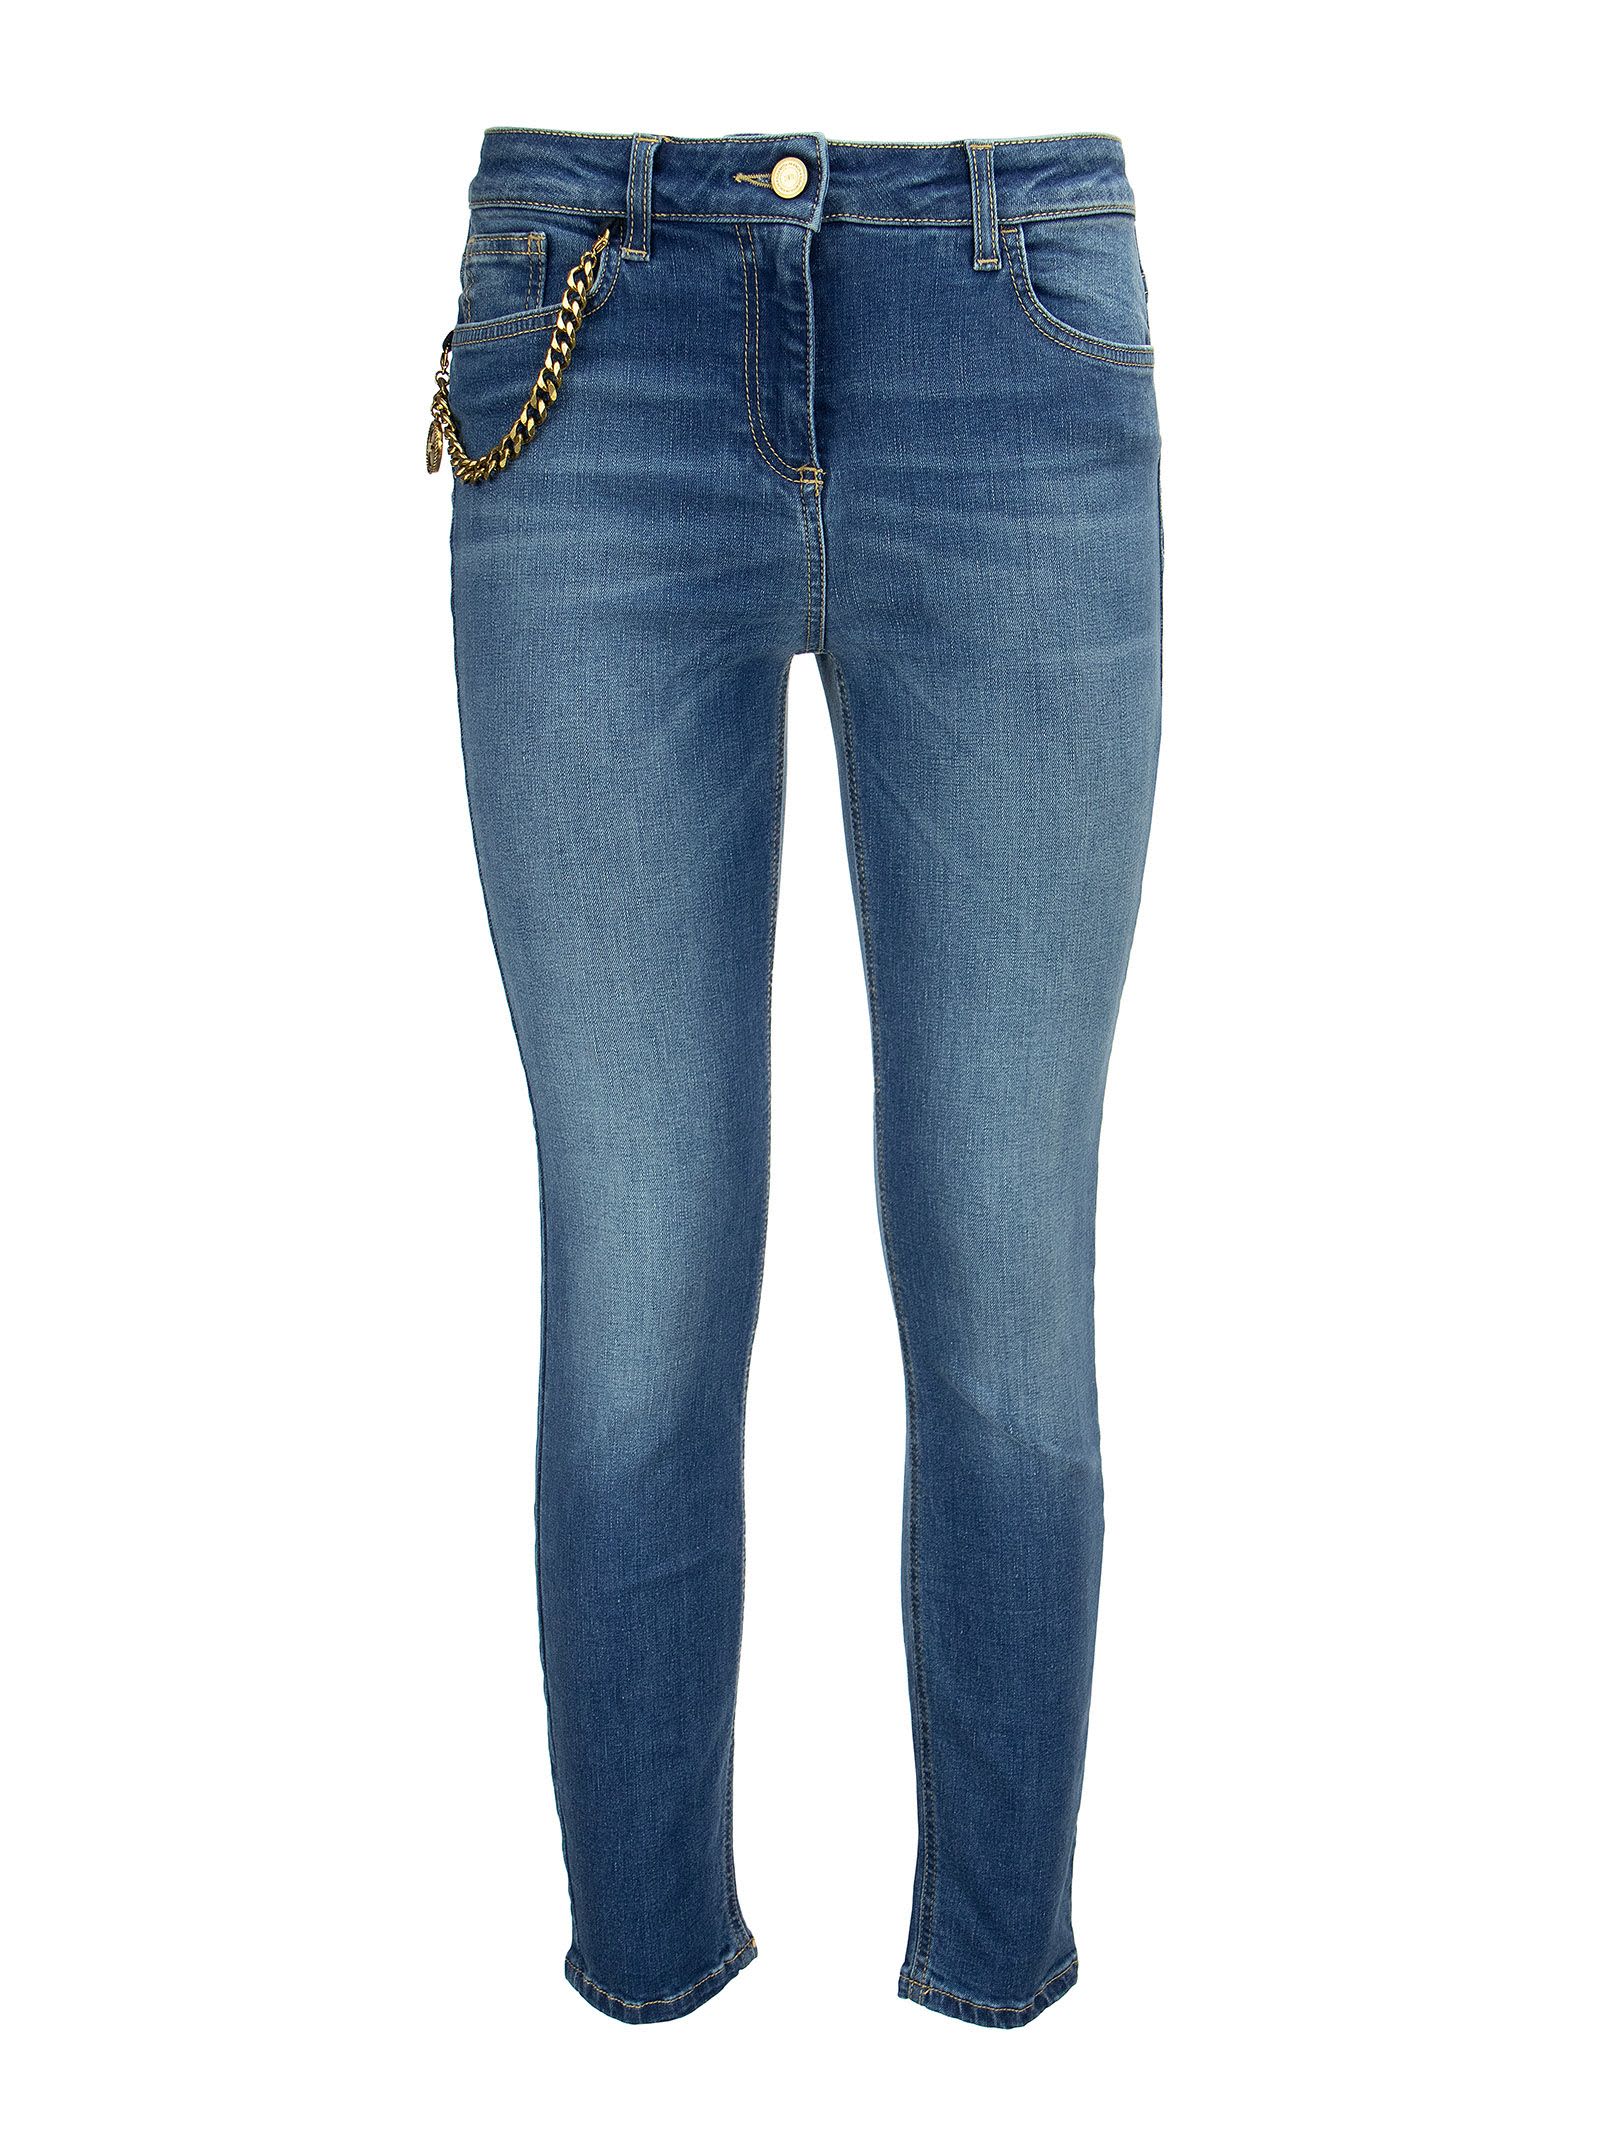 Elisabetta Franchi Skinny Jeans With Aged Gold Charm